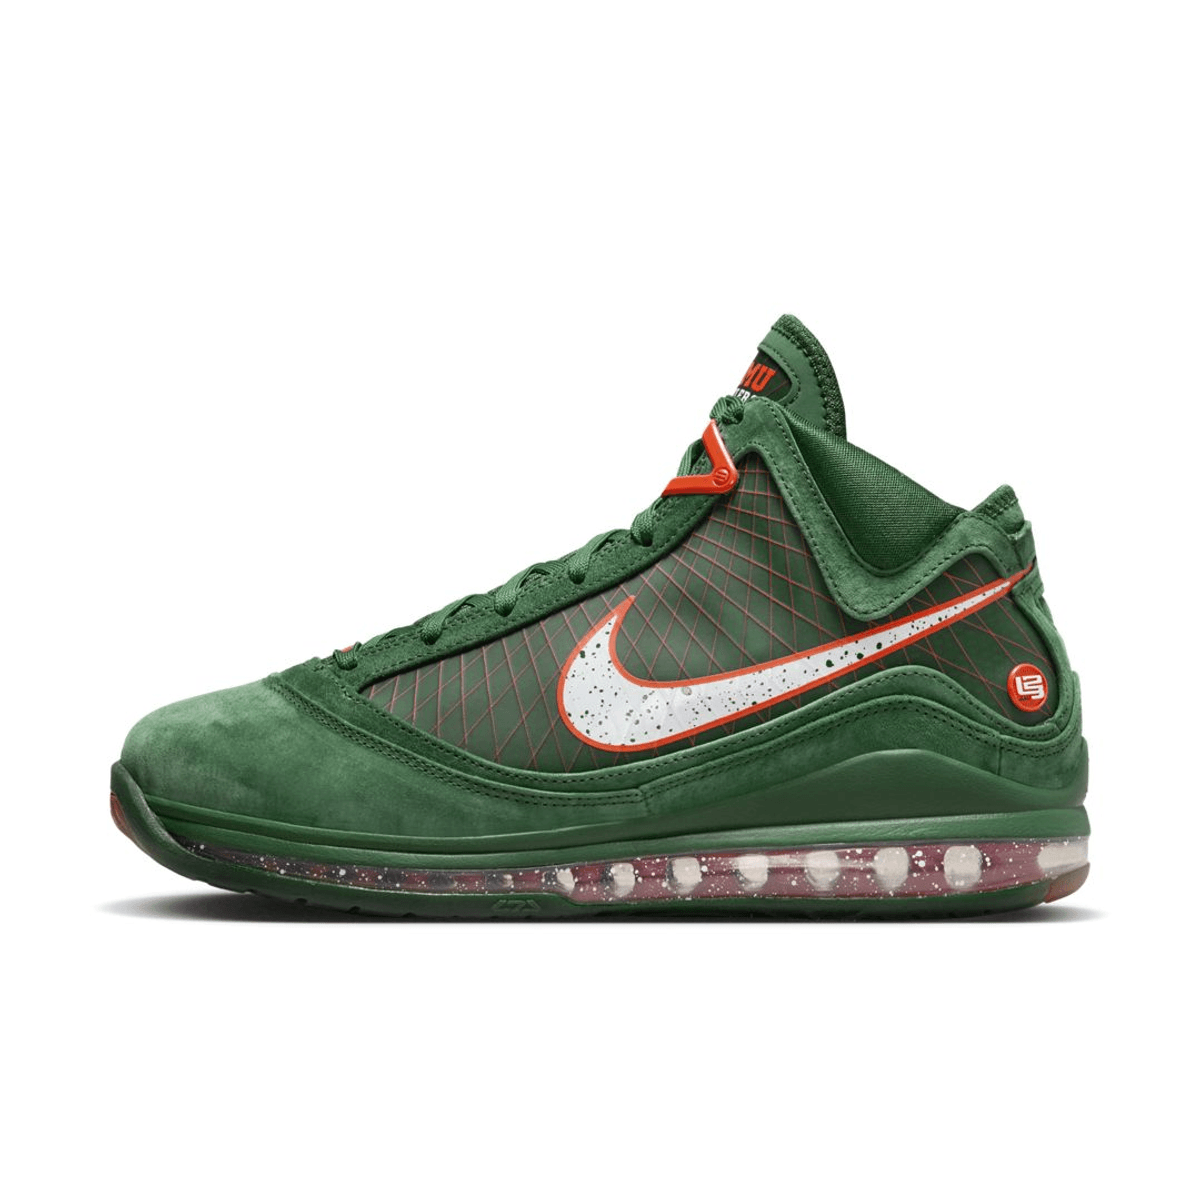 Official Images of The Nike LeBron 7 Florida A&M "Gorge Green"